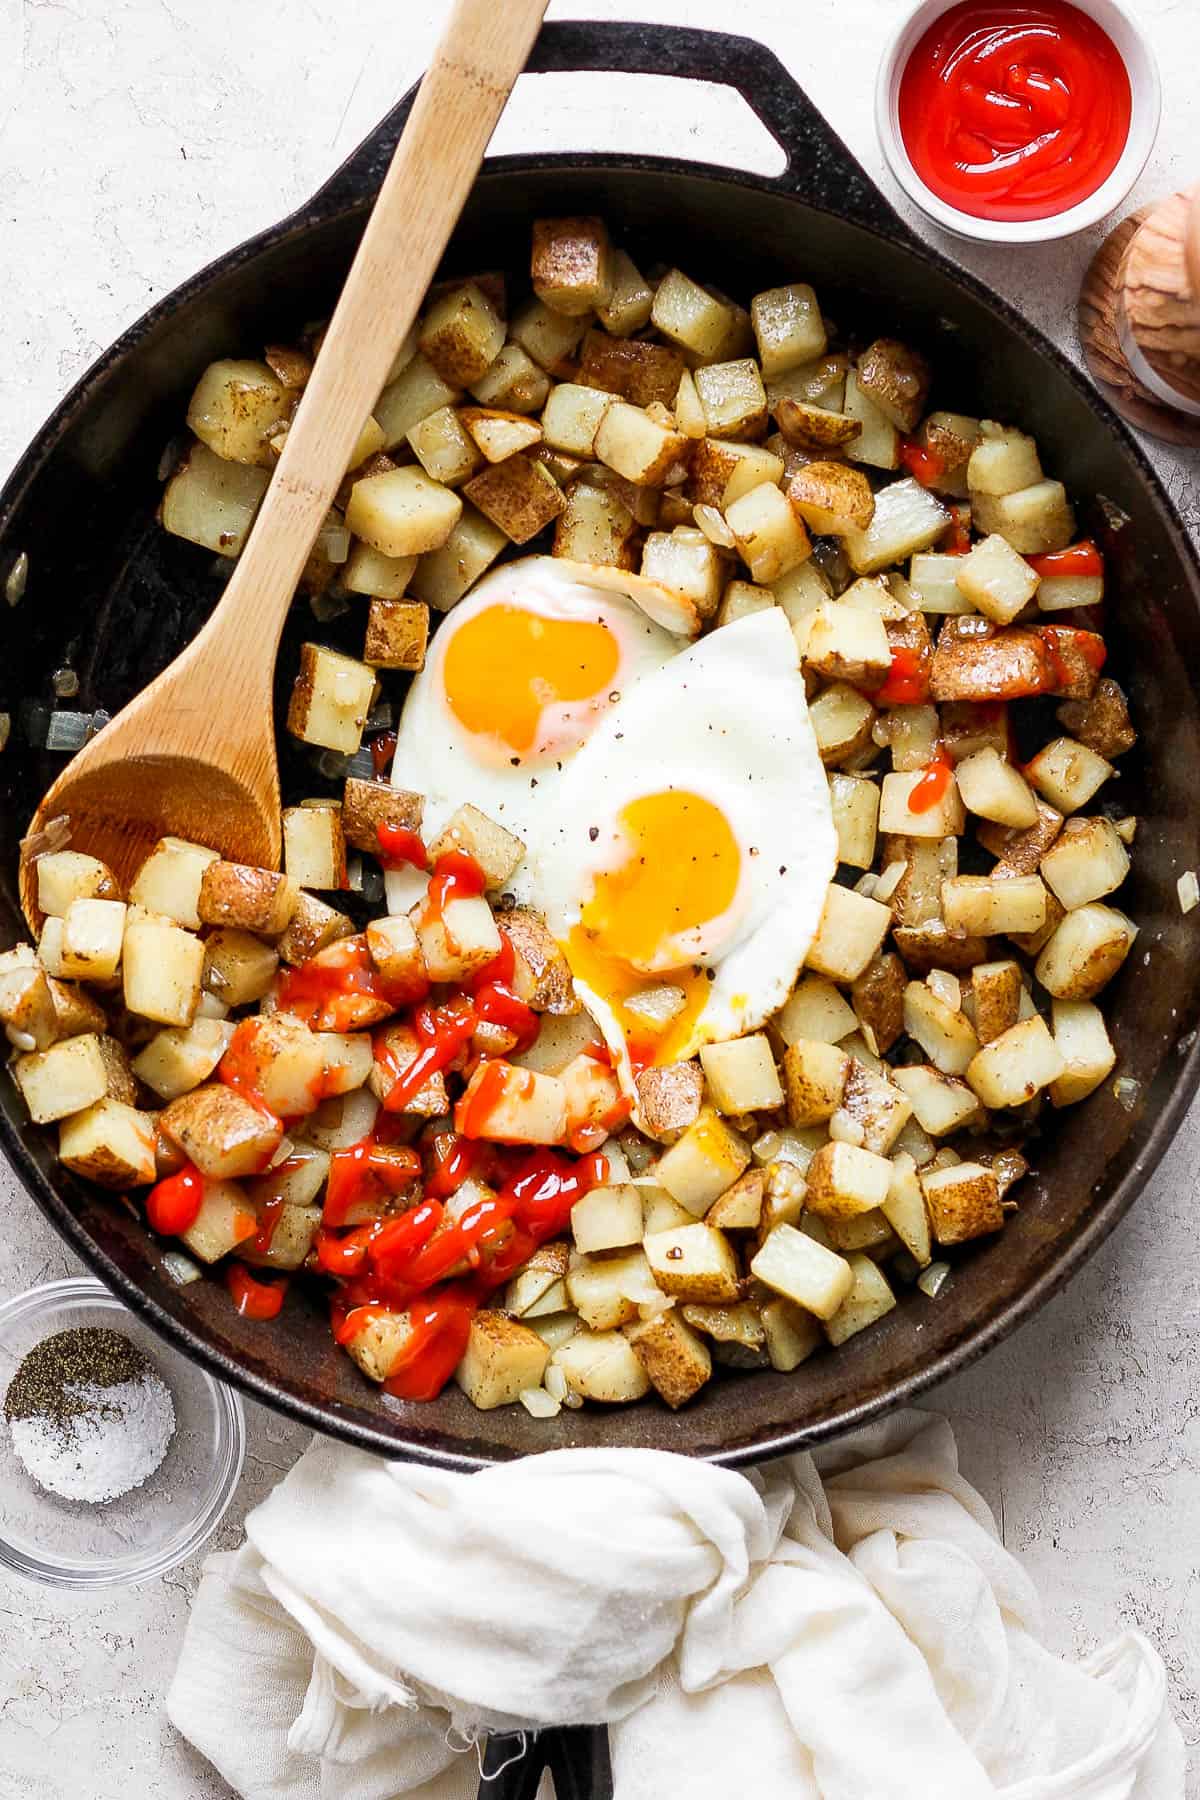 American fries in a skillet with two over easy eggs and ketchup.